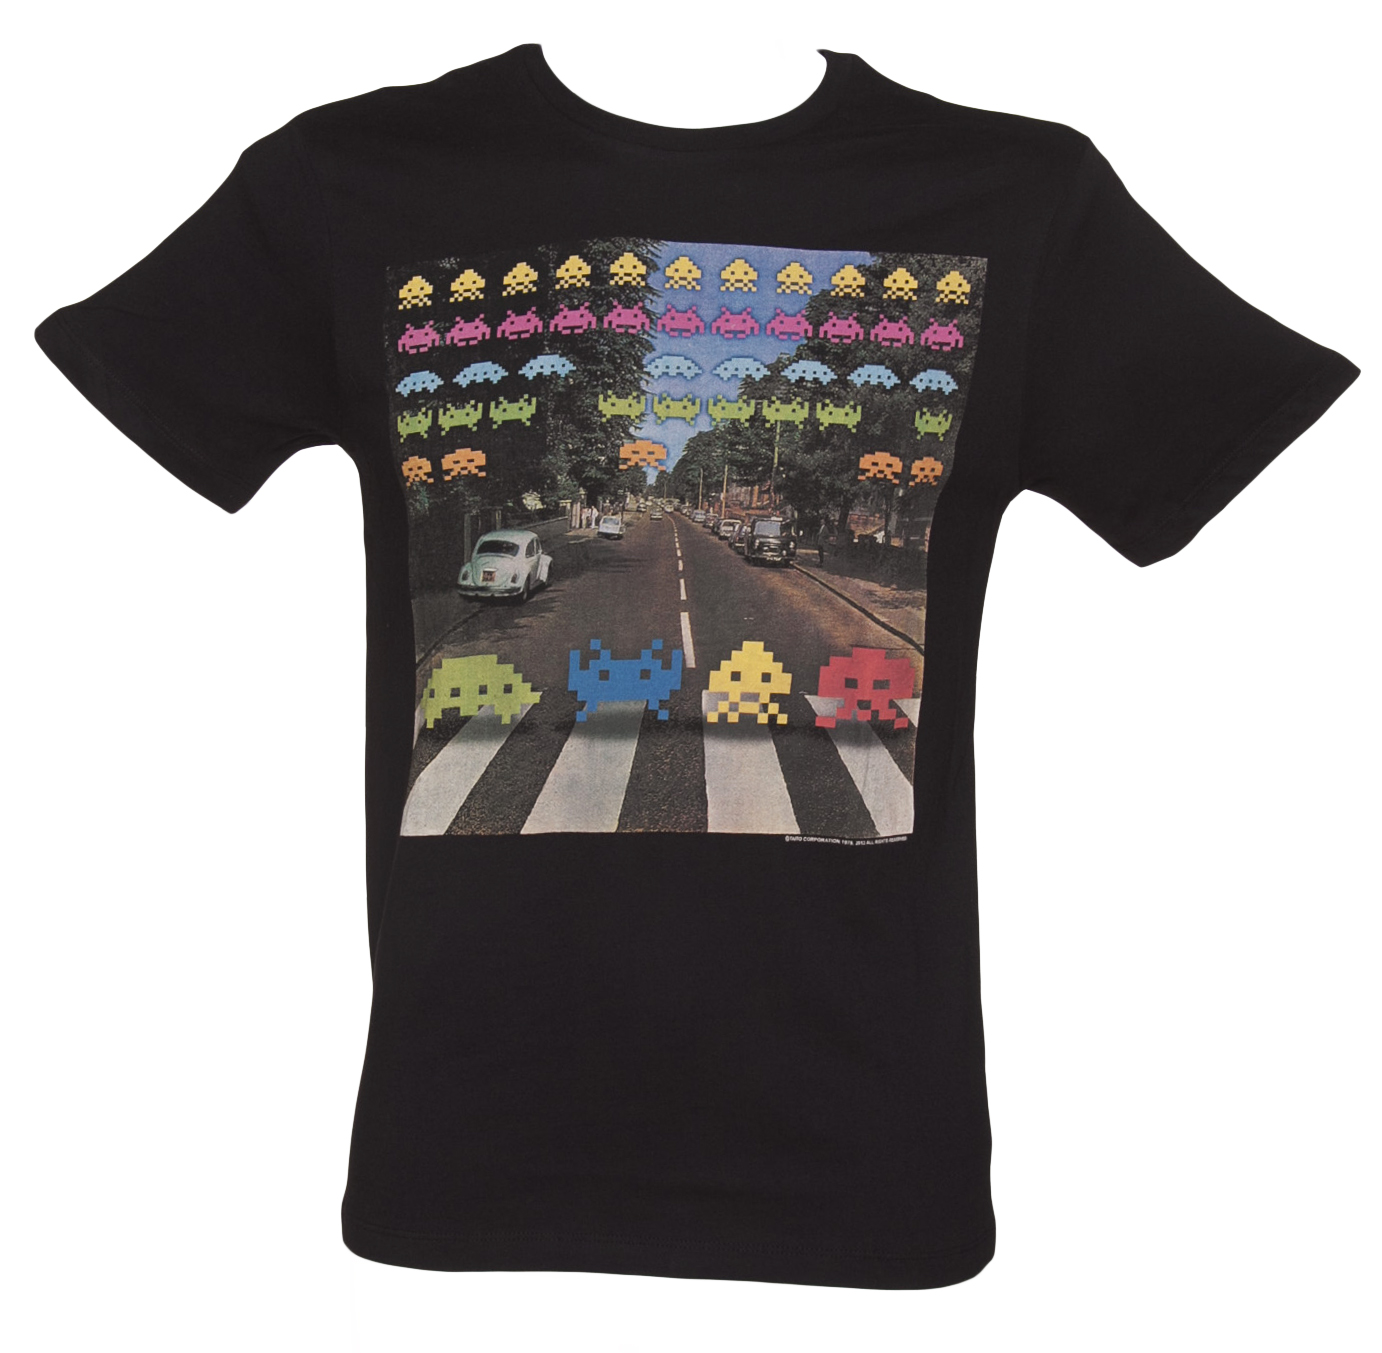 Mens Black Retro Space Invaders Abbey Road